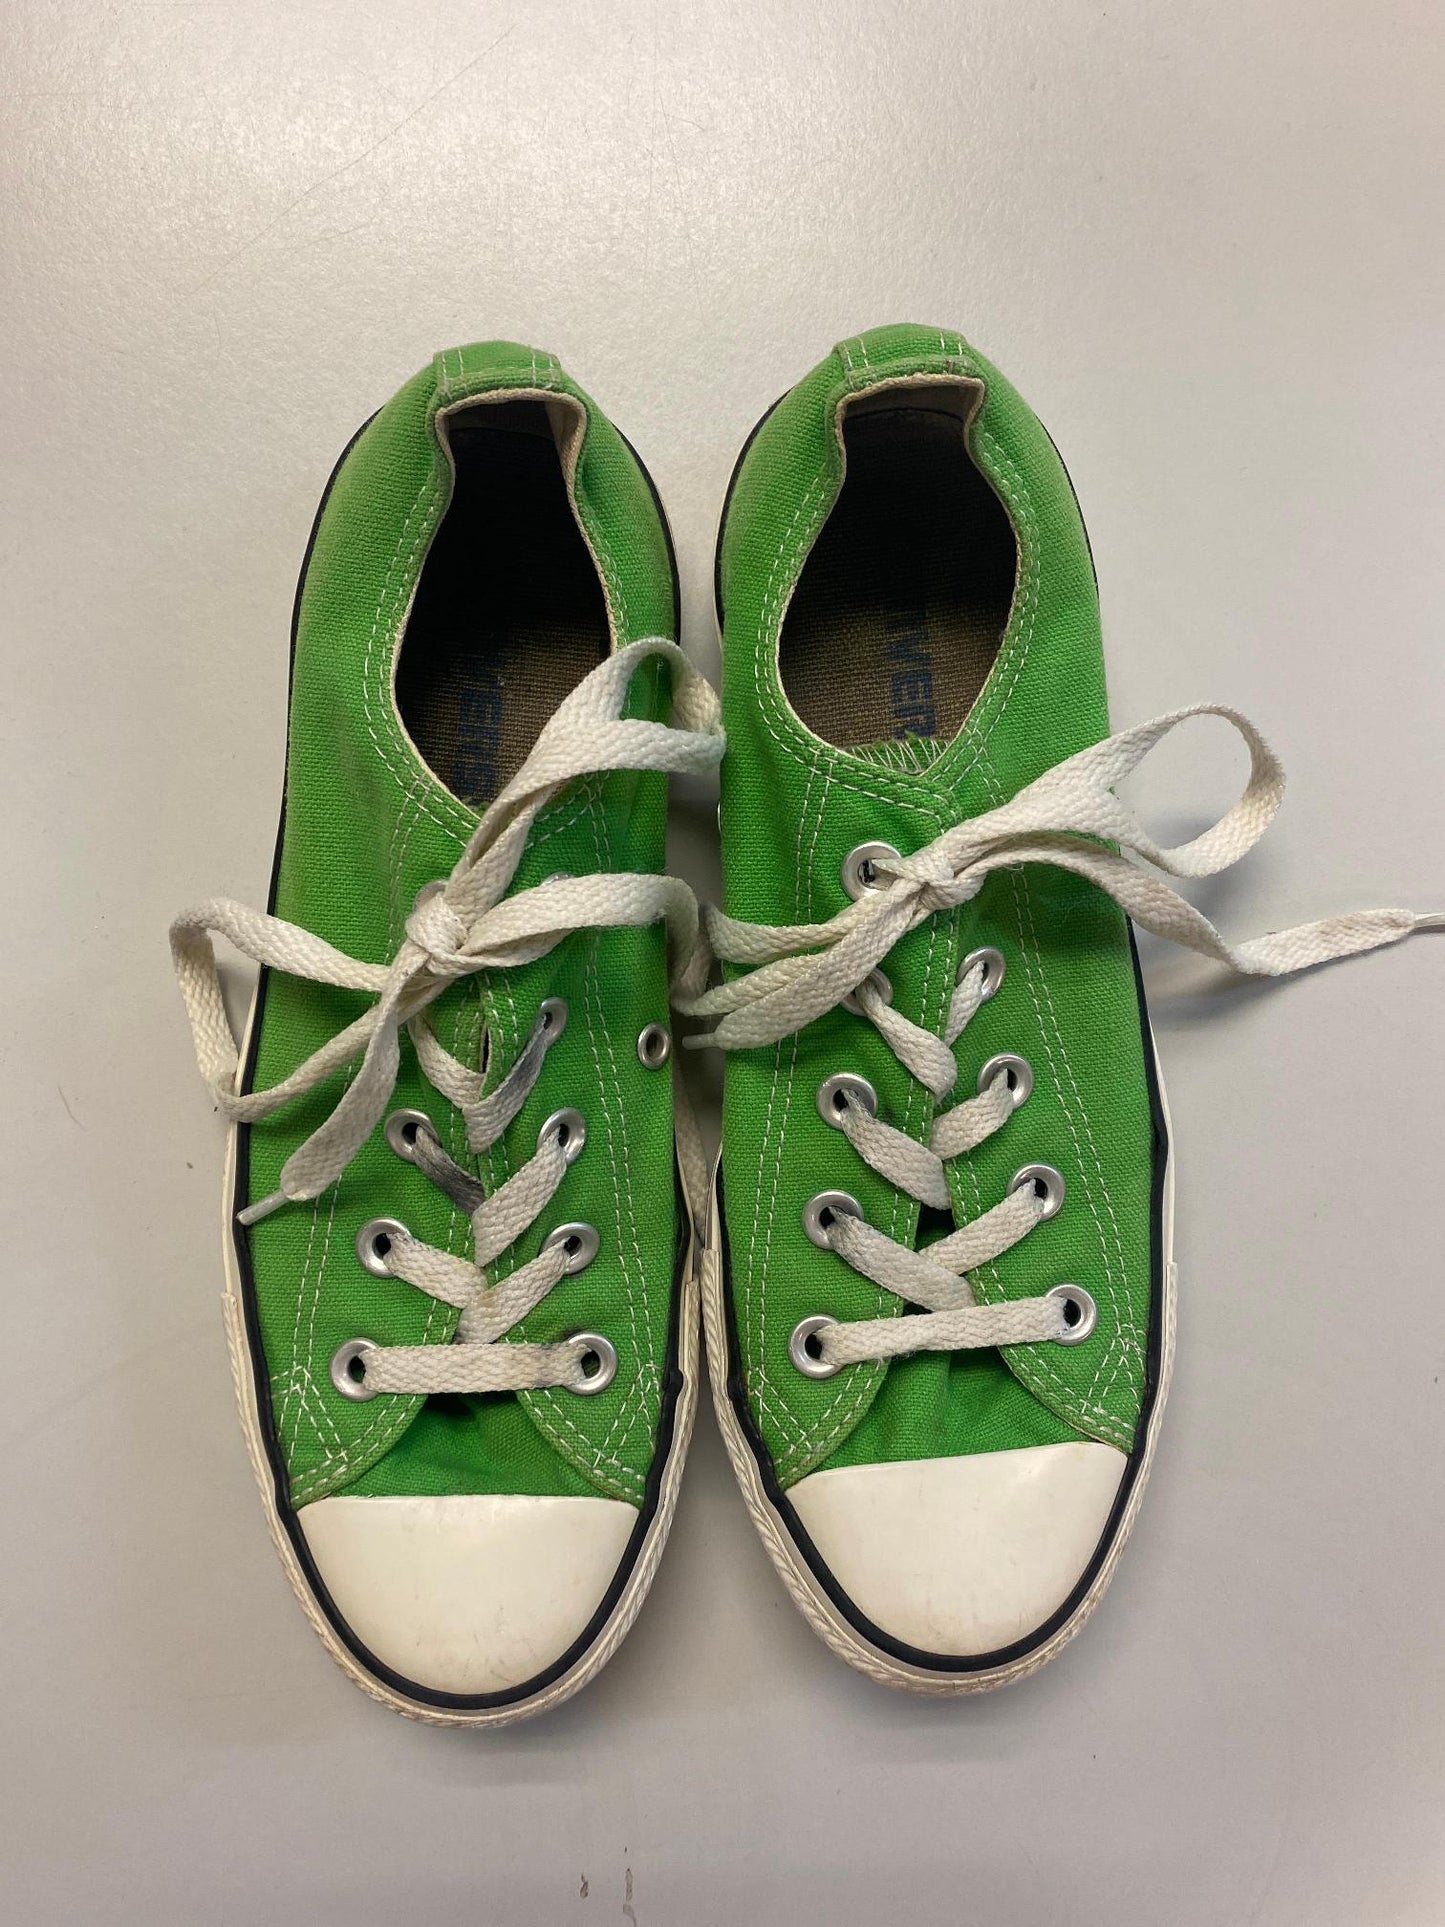 Bright green low top Converses, Converse, size 4 - Damaged Item Sale